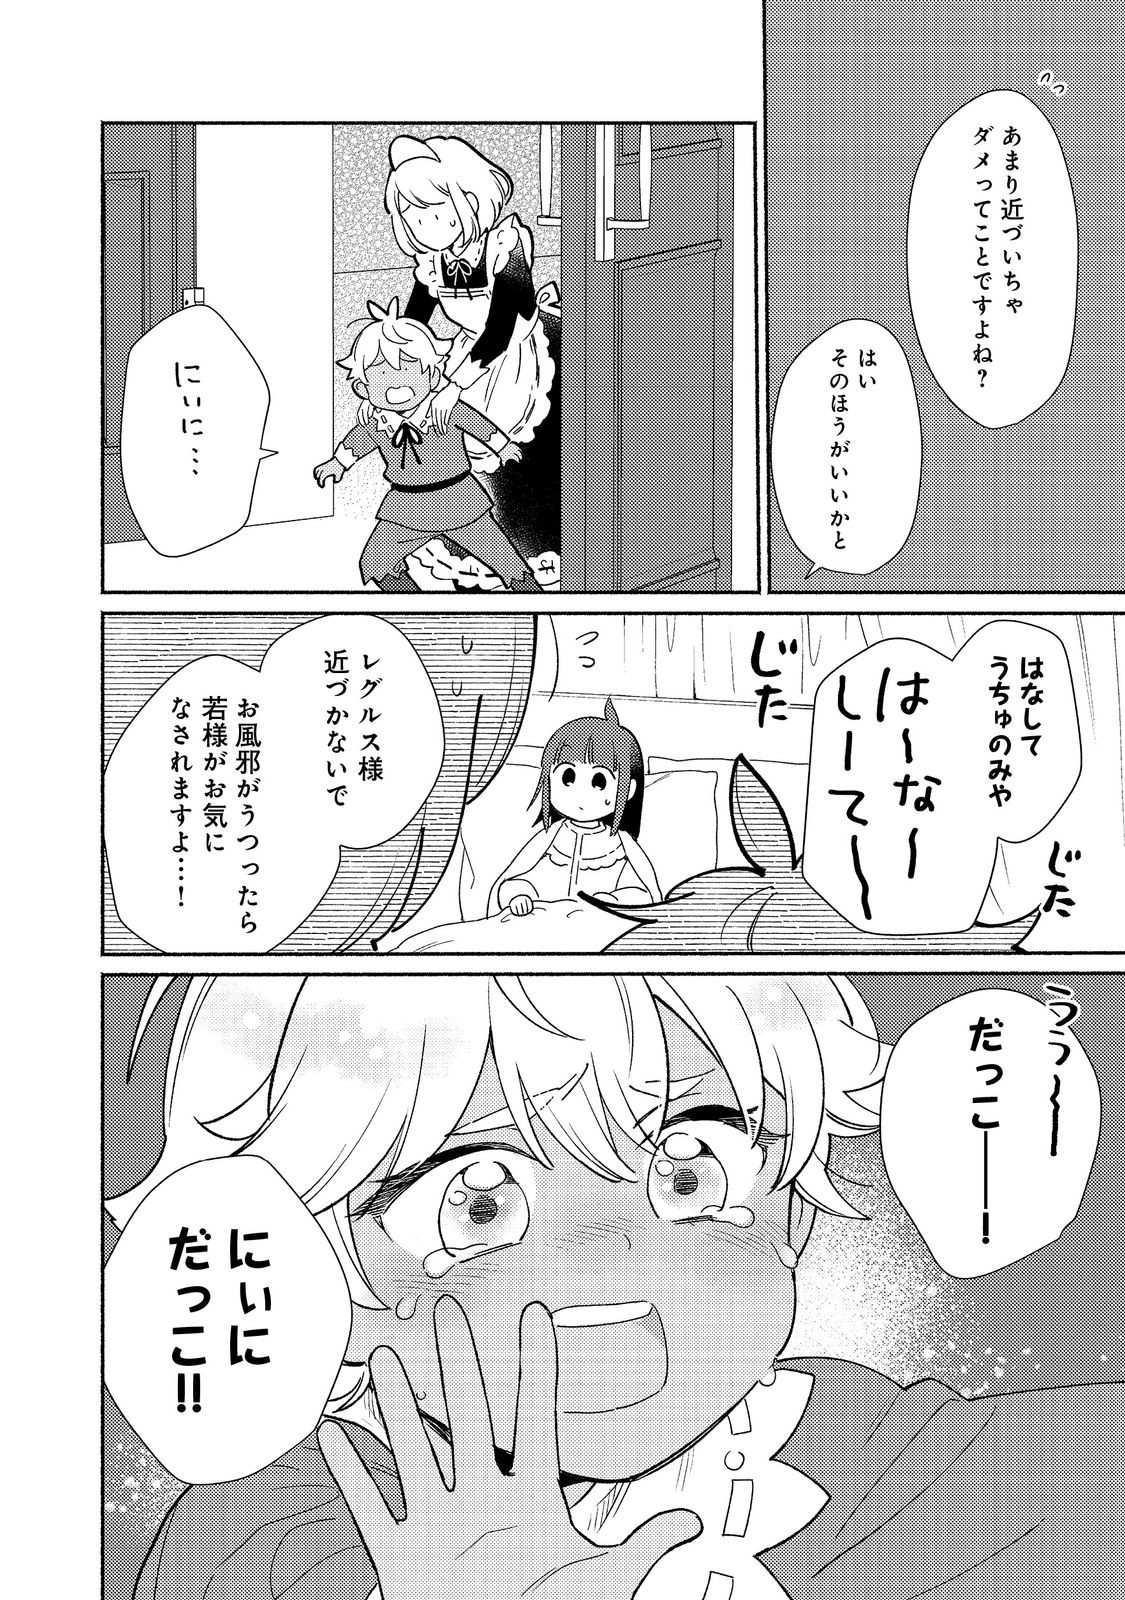 I’m the White Pig Nobleman 第22.2話 - Page 2